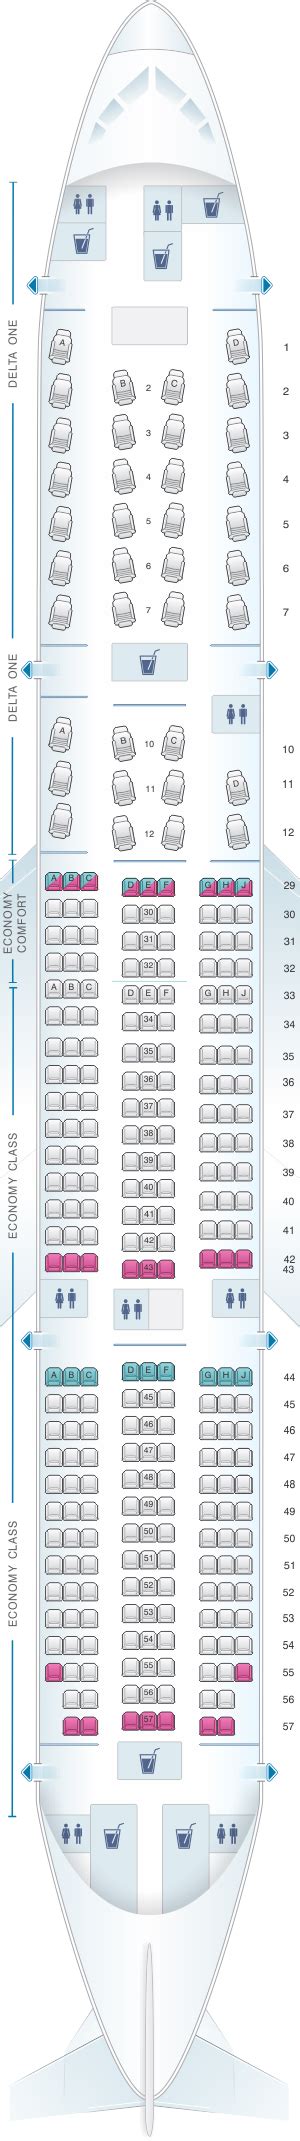 boeing 777 seating chart delta